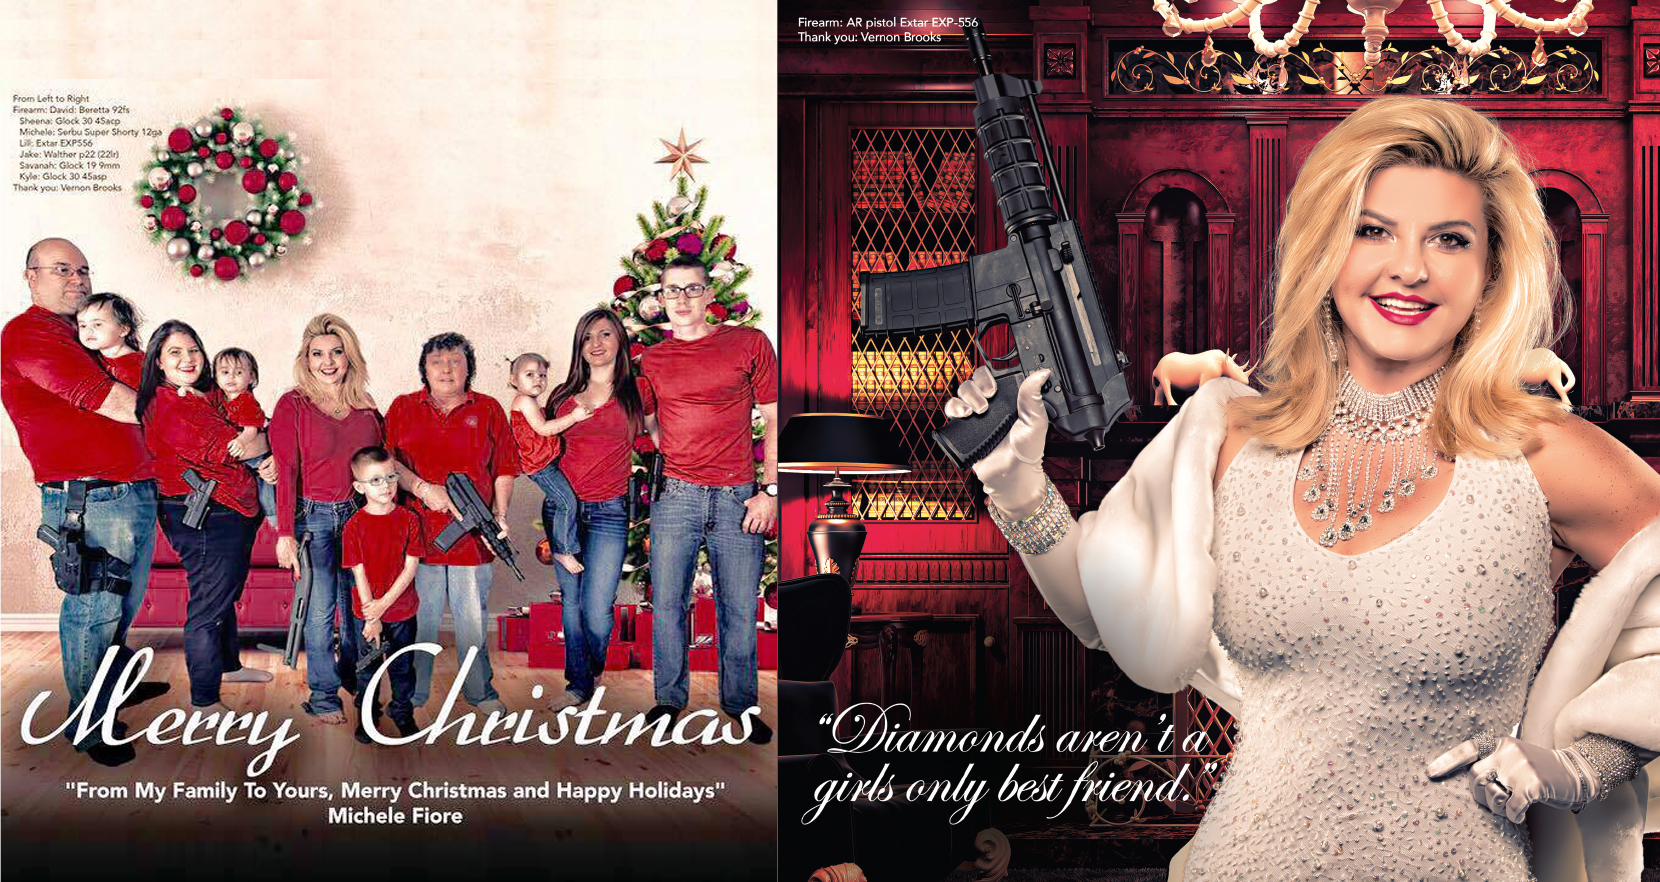 Trigger Happy Holidays – Republican Lawmaker Posts Christmas Card Featuring Fully Armed Family